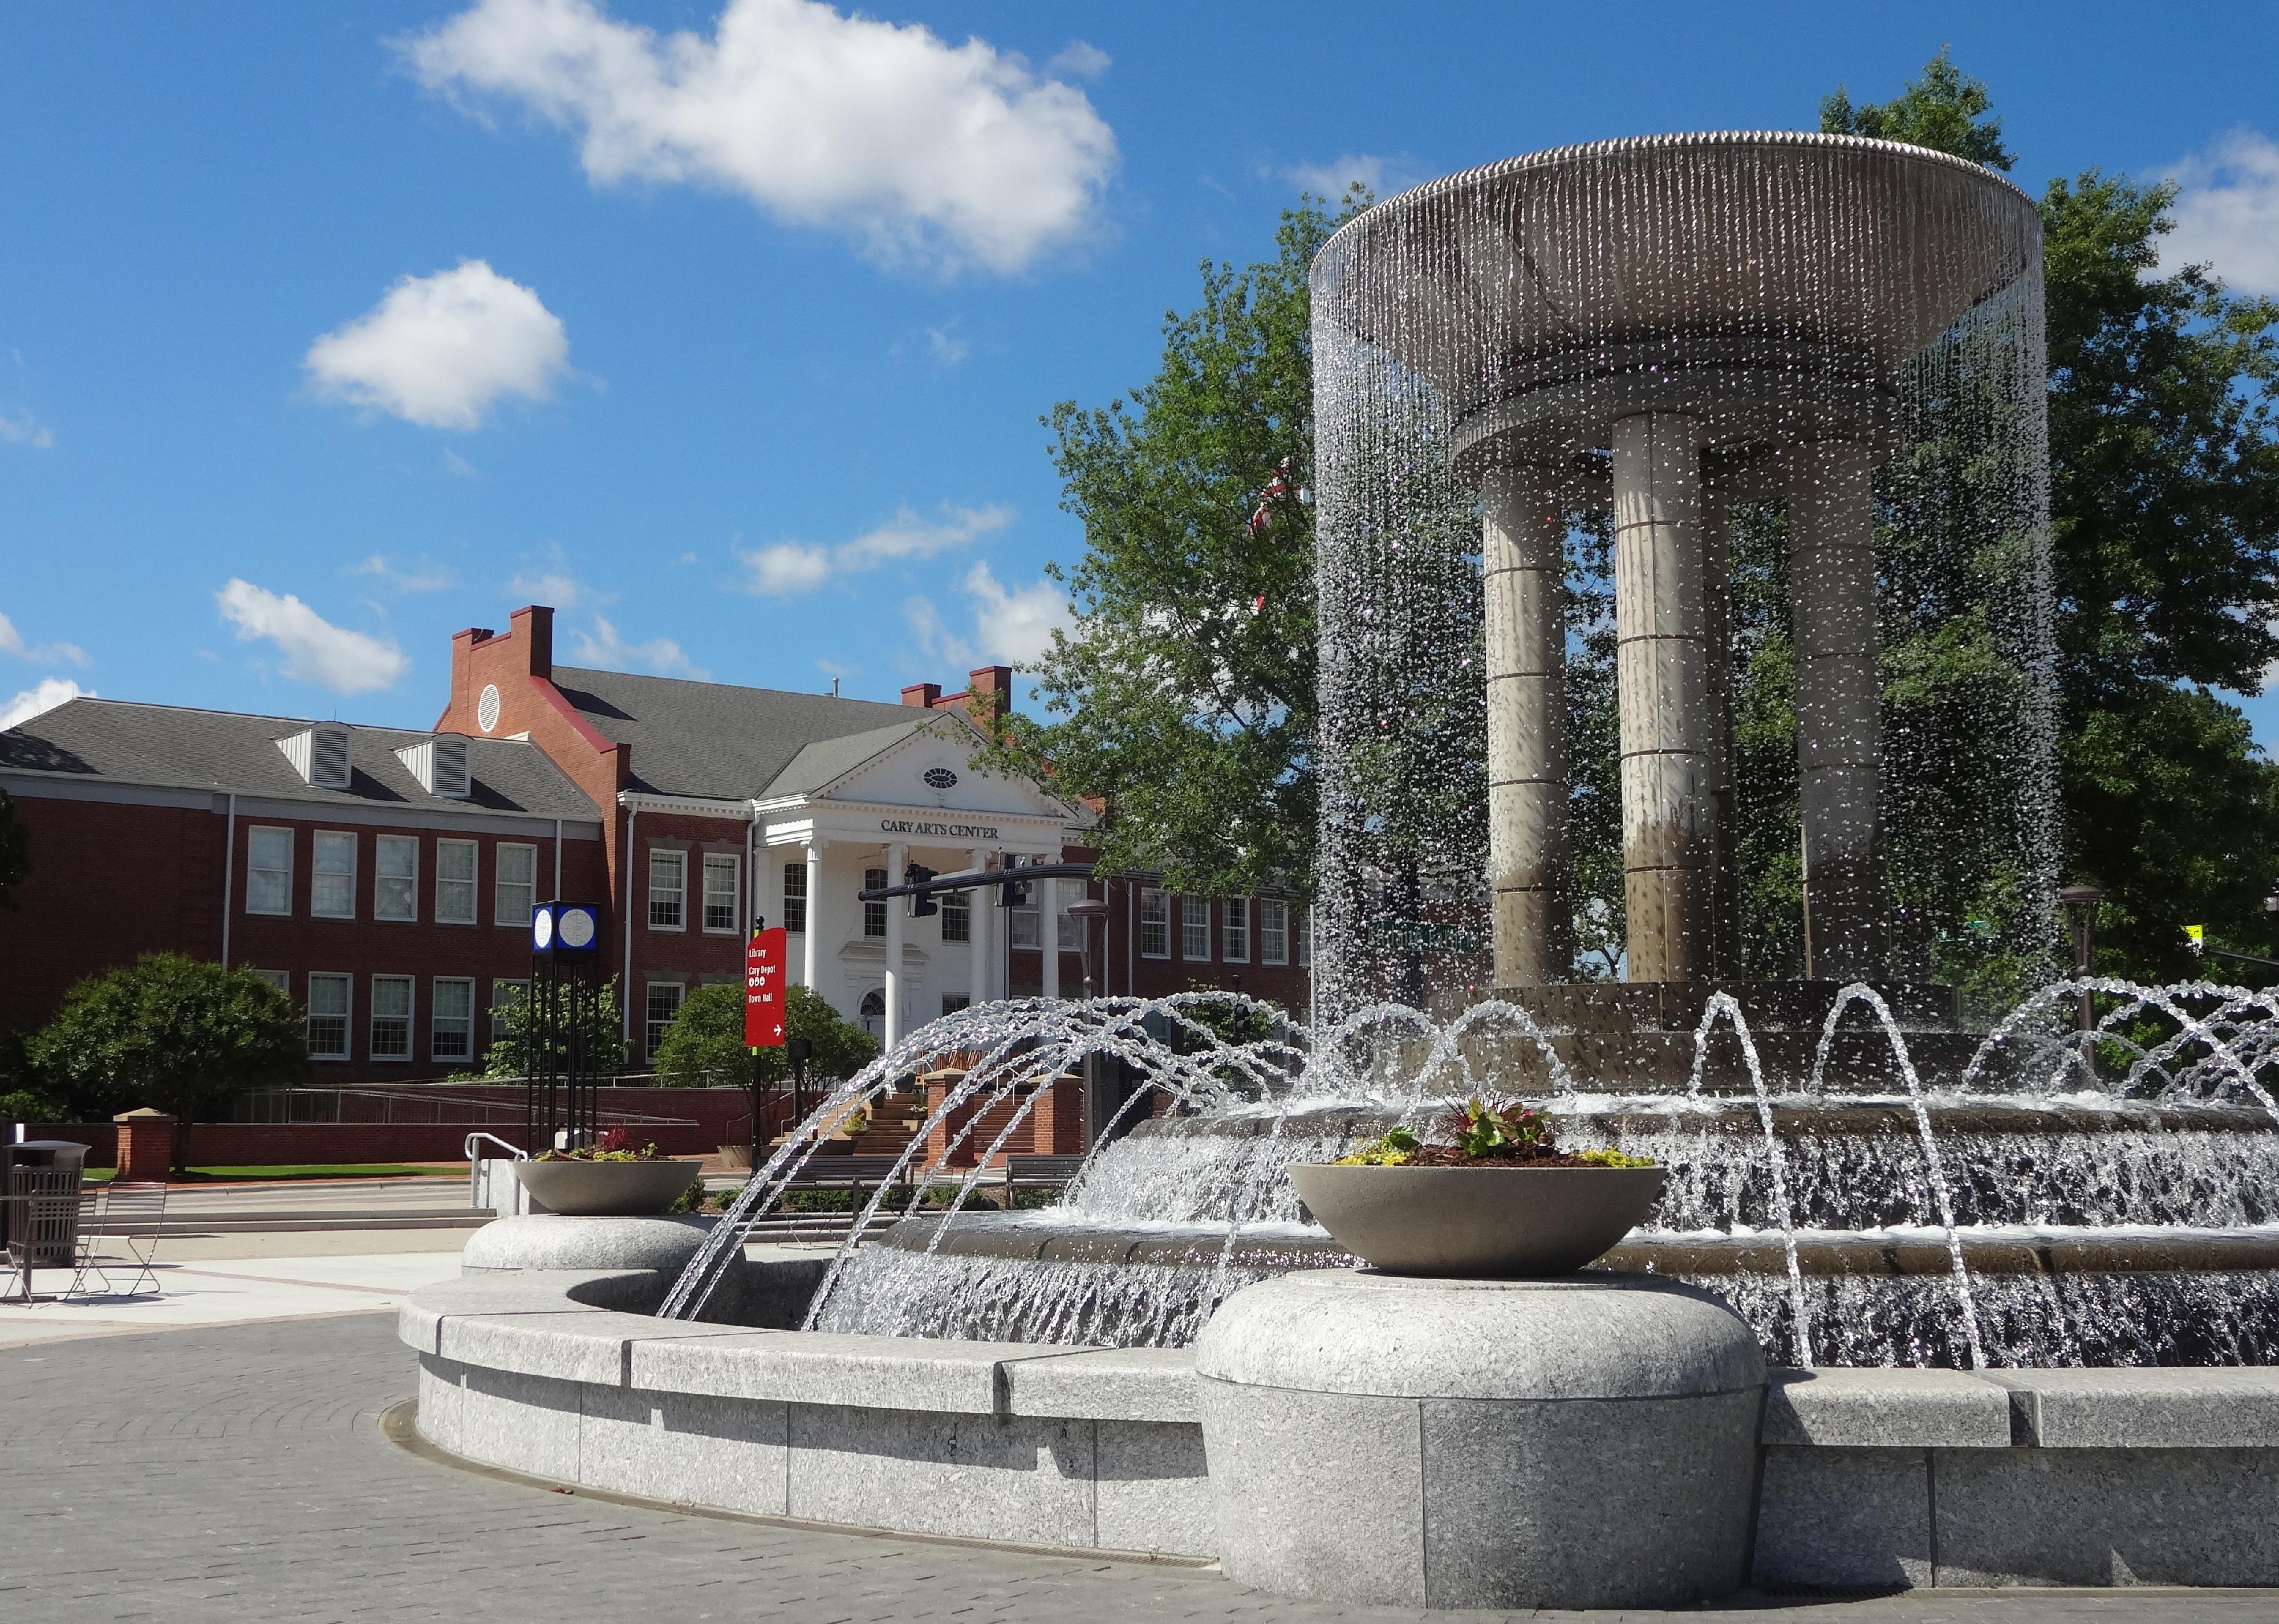 A large water fountain in front of a brick building with white columns.